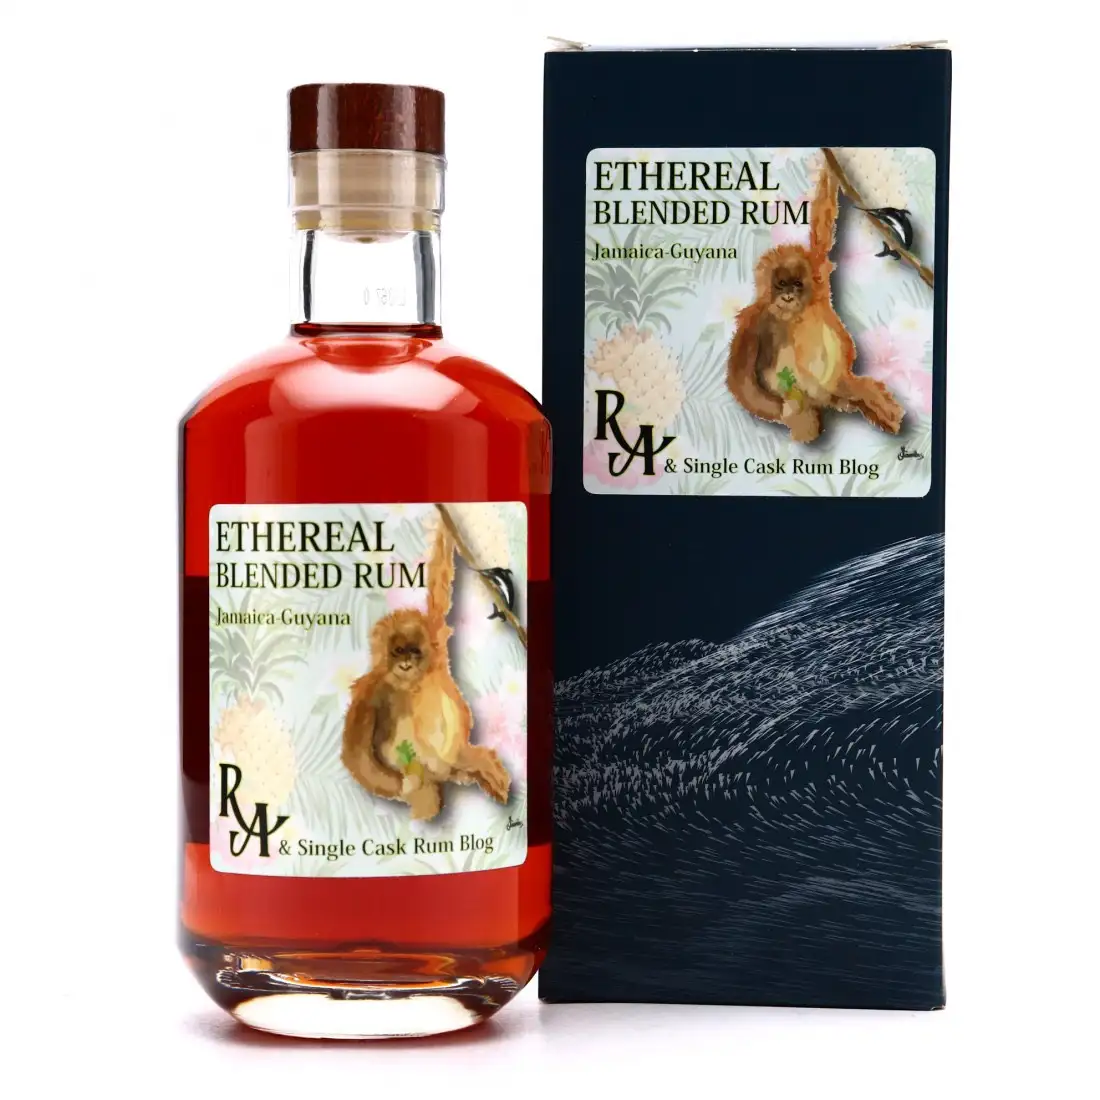 Image of the front of the bottle of the rum Rum Artesanal Ethereal Blended Rum (Single Cask Rum Blog)